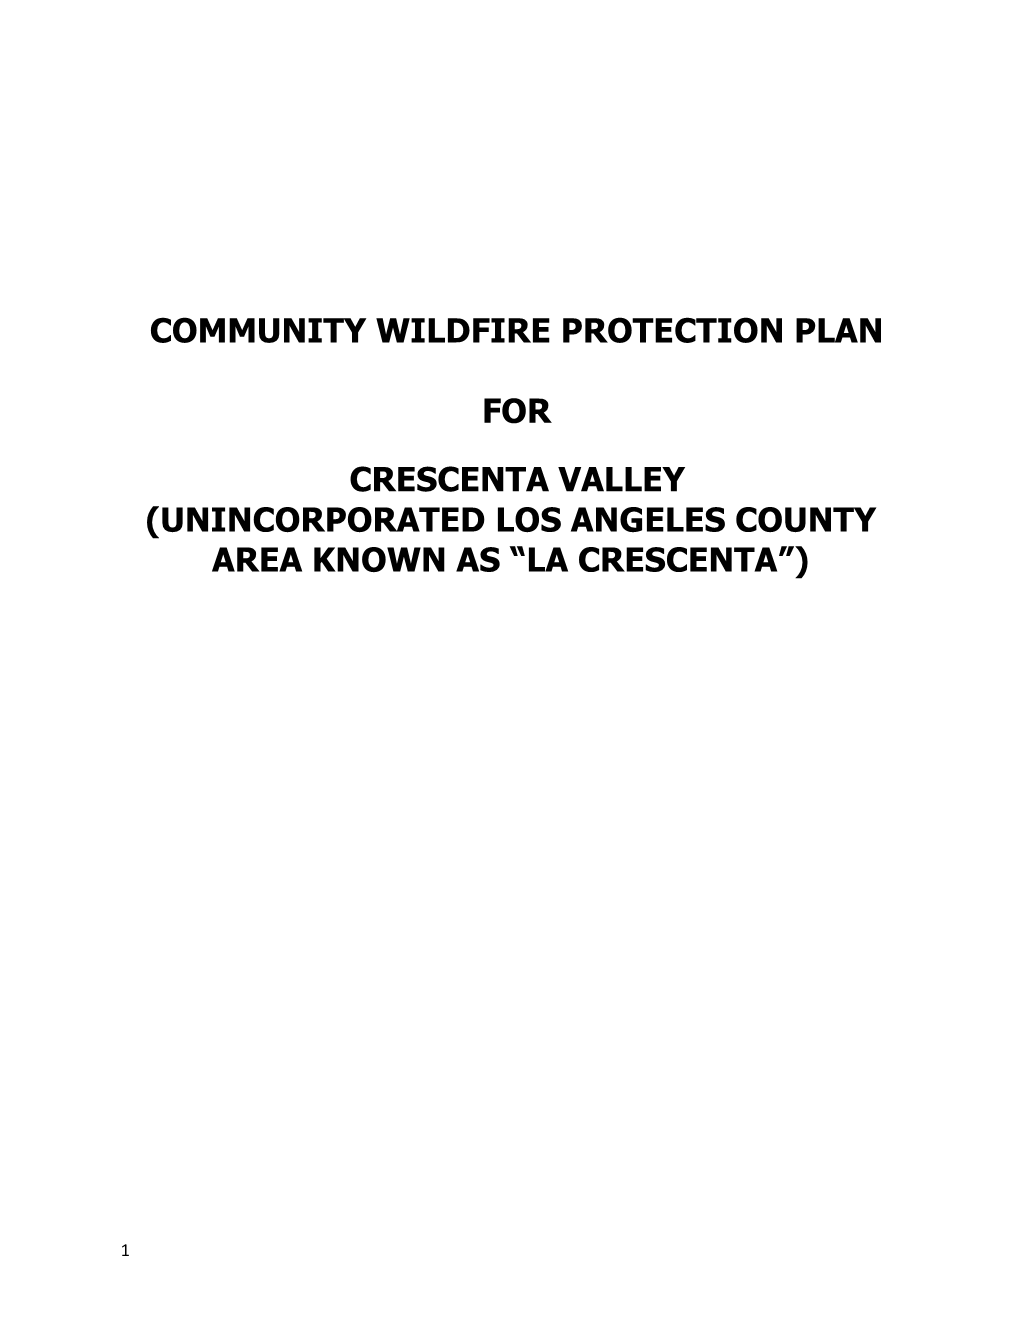 Community Wildfire Protection Plan For